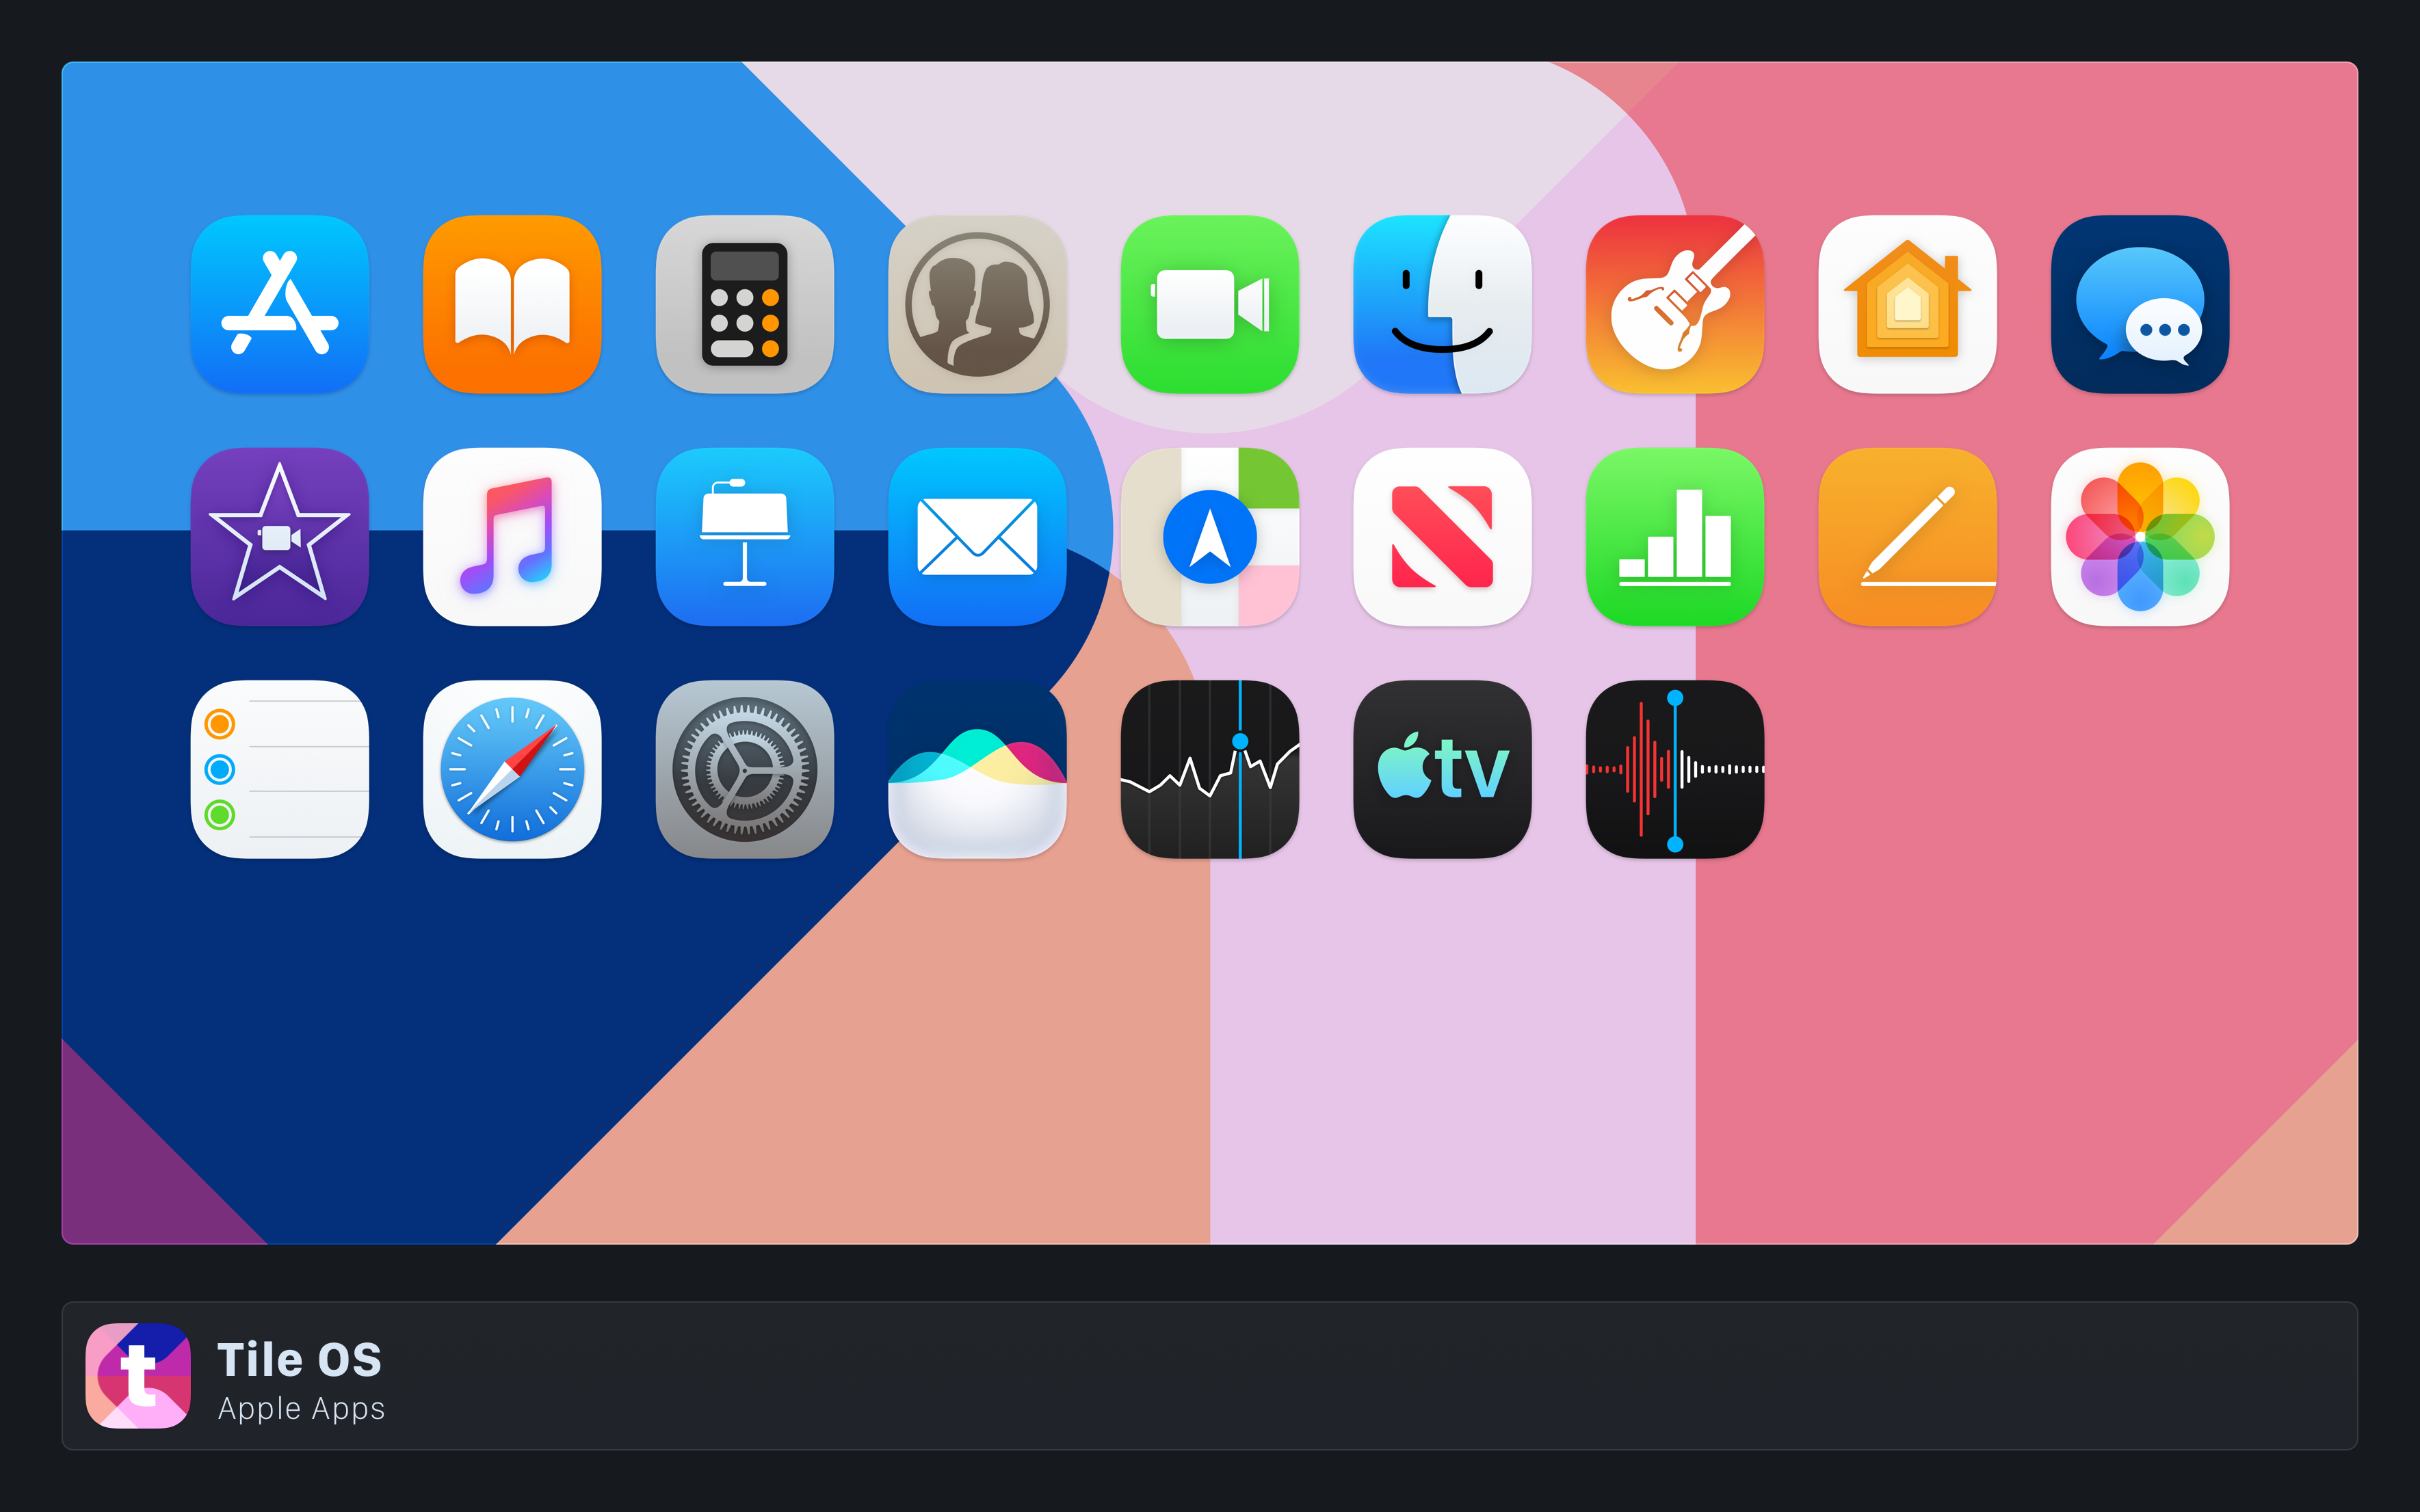 Tile OS - Part 2: System Apps Icons